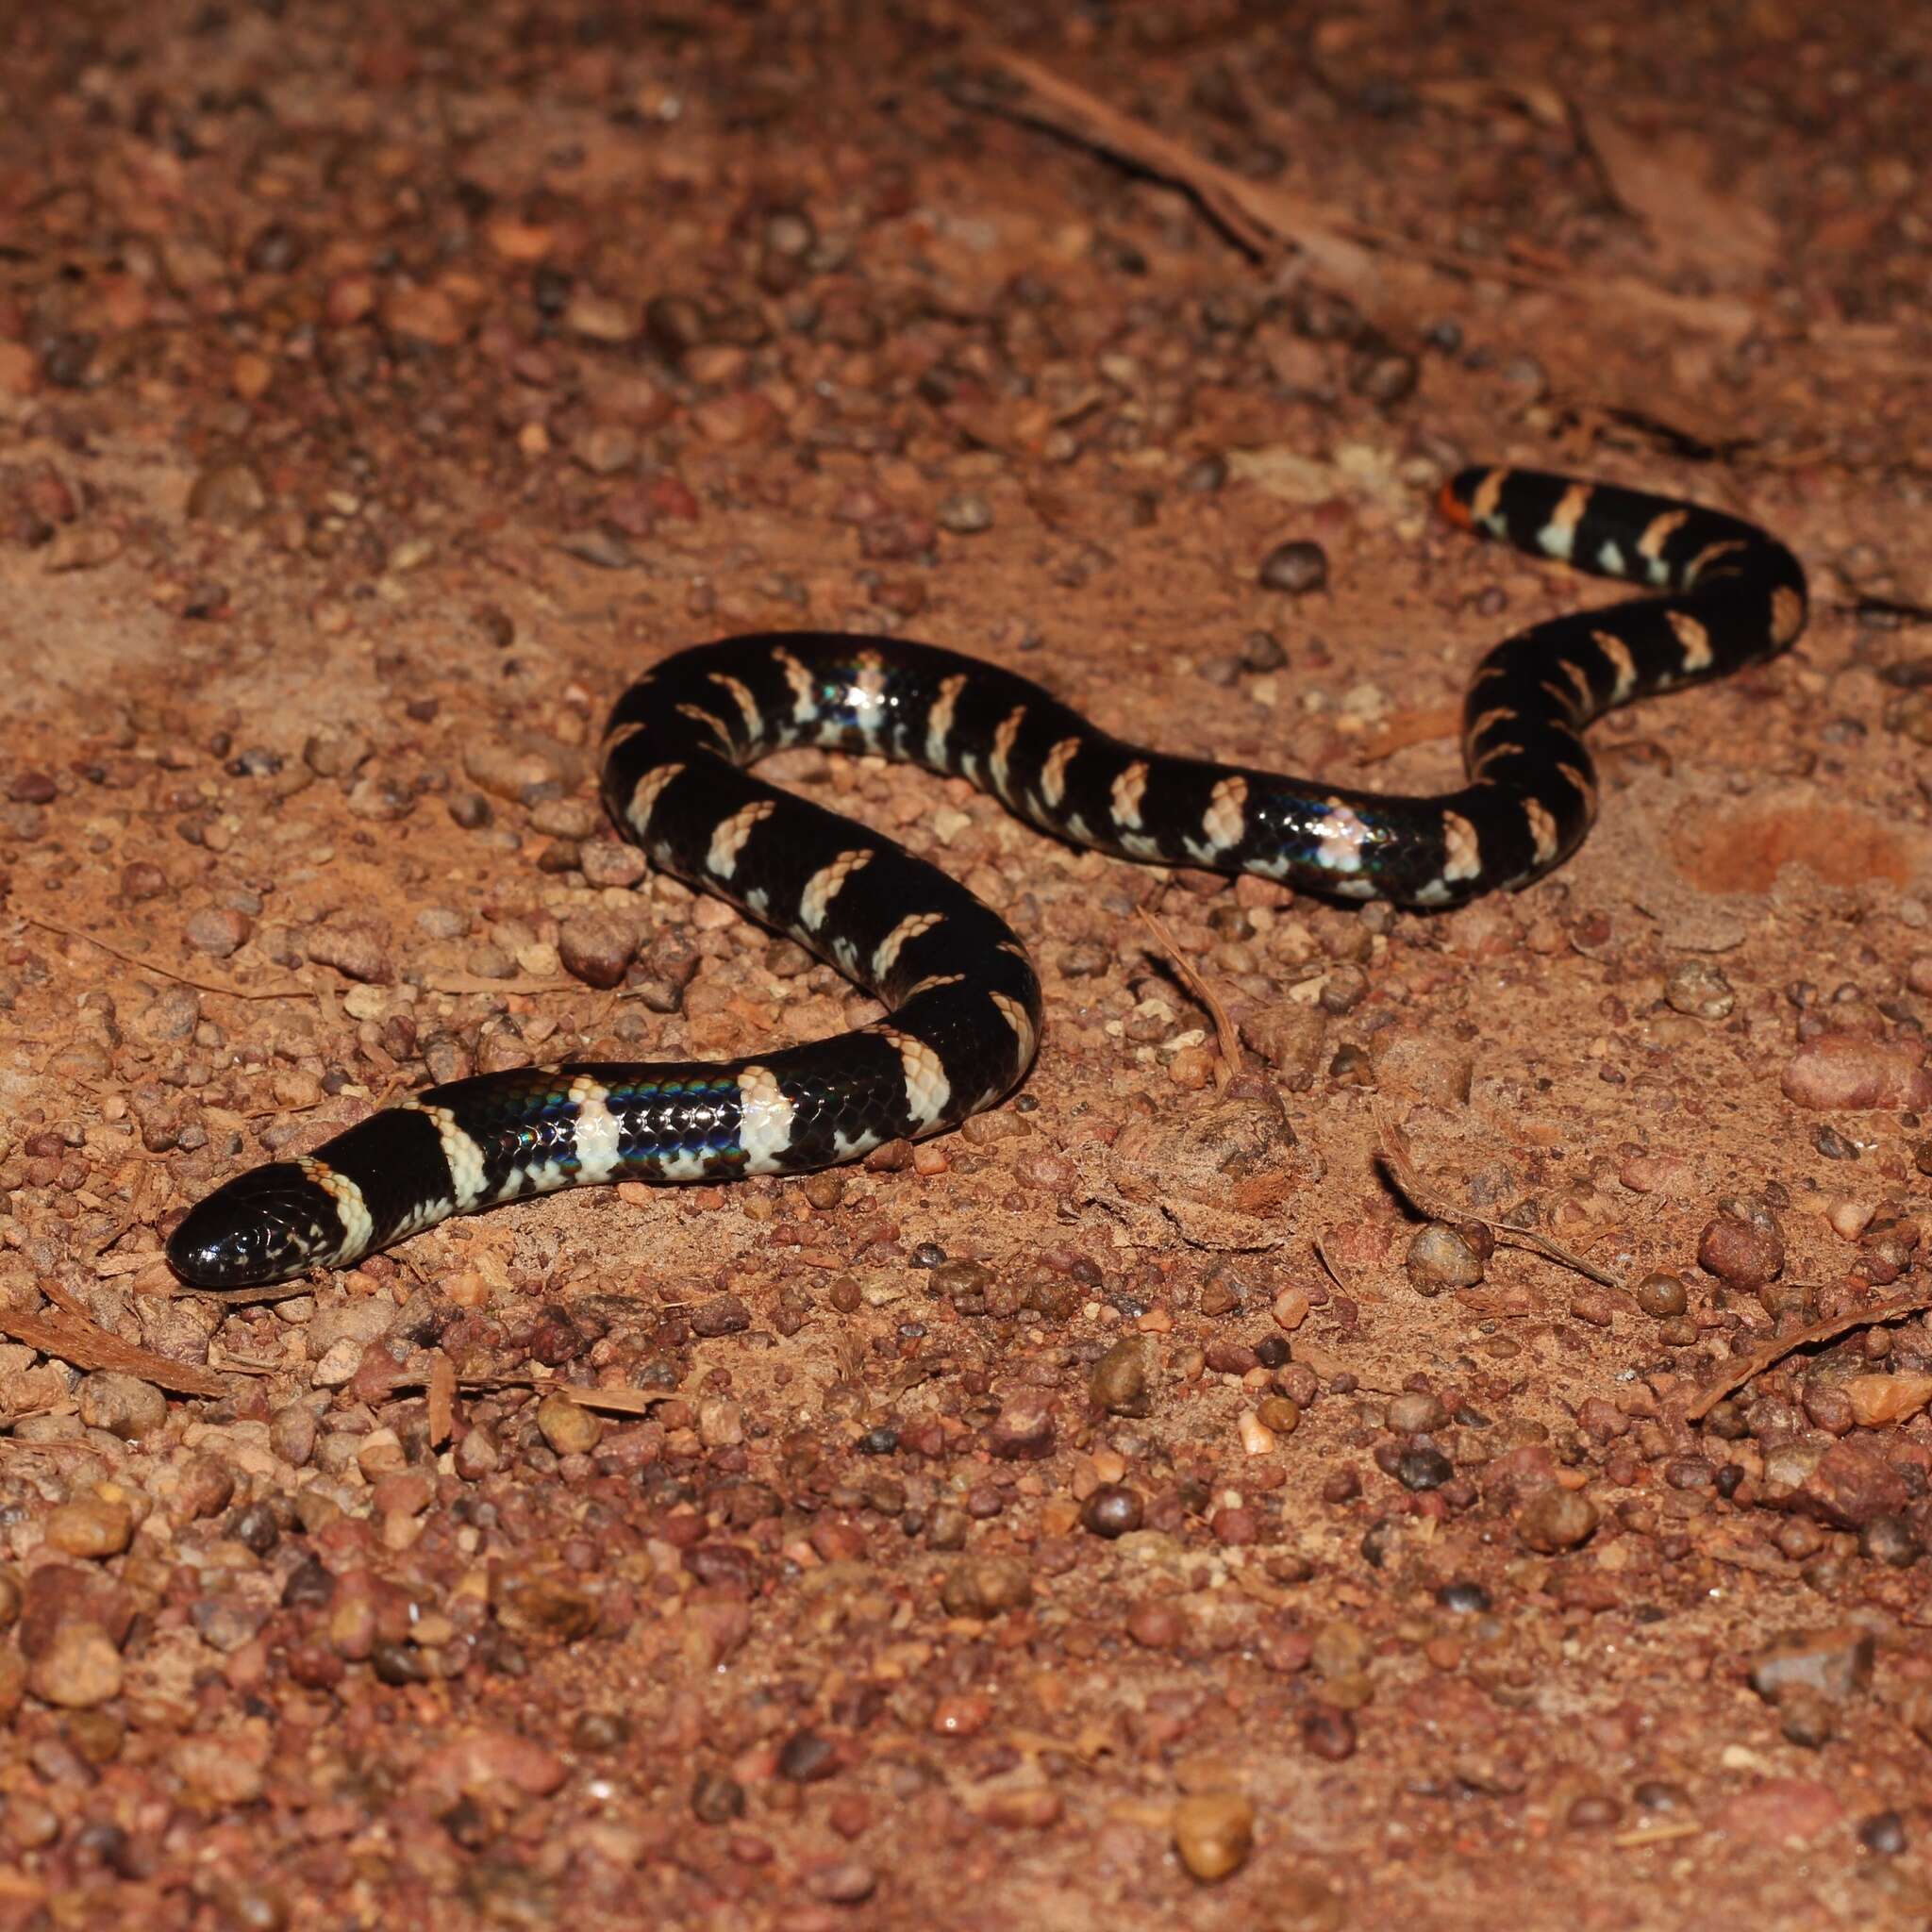 Image of Cylindrophis jodiae Amarasinghe, Ineich, Campbell & Hallermann 2015